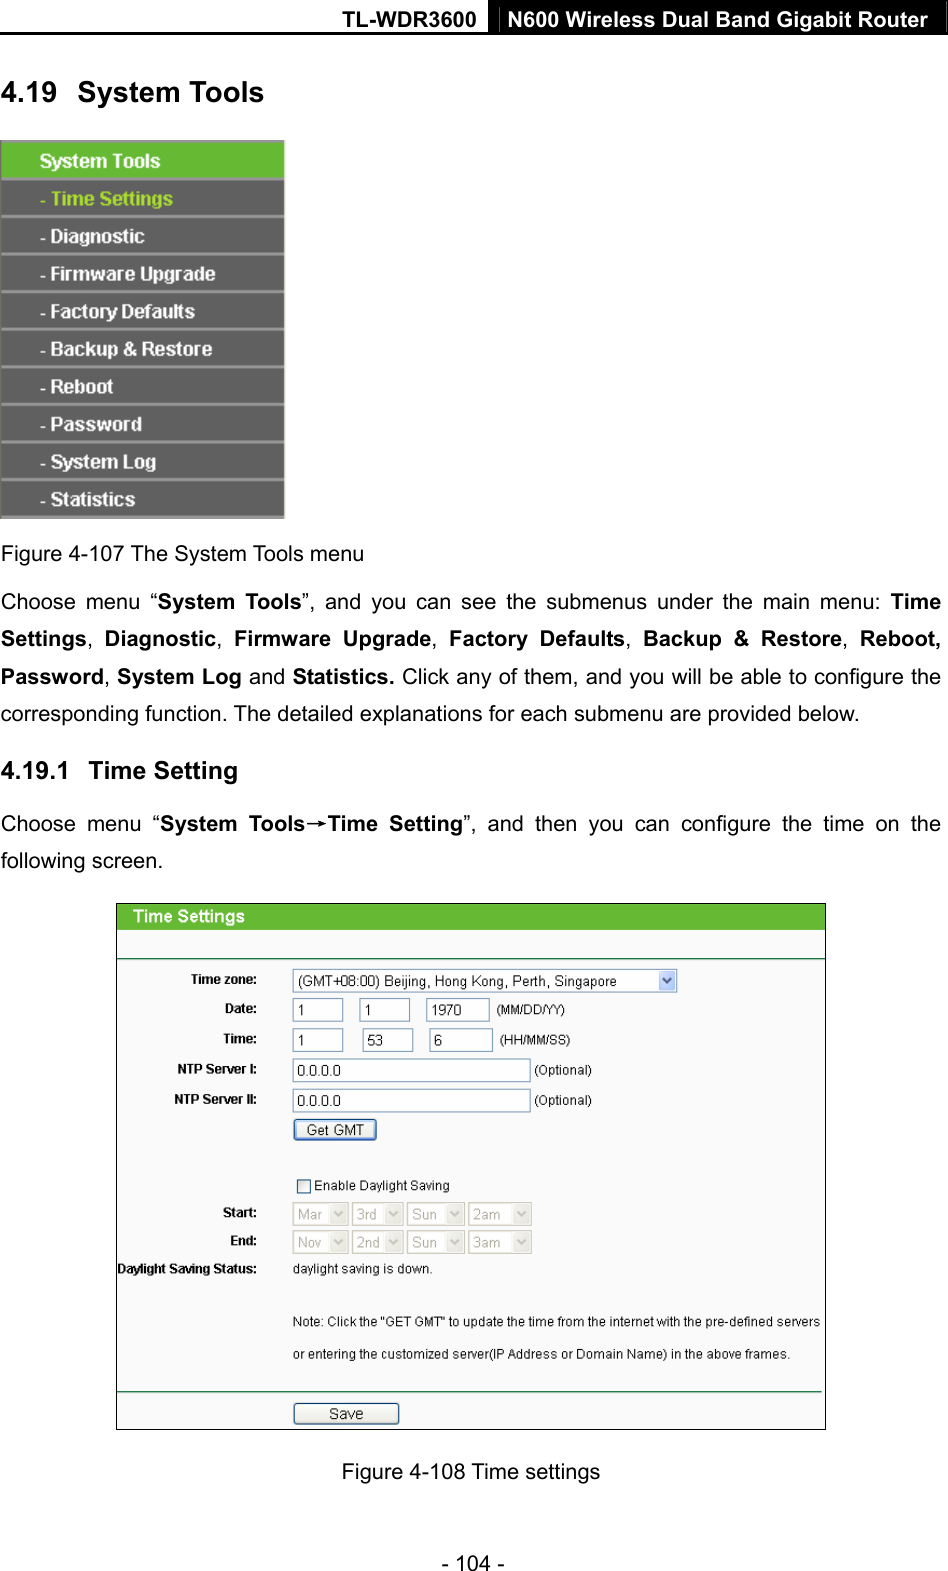 TL-WDR3600 N600 Wireless Dual Band Gigabit Router  - 104 - 4.19  System Tools  Figure 4-107 The System Tools menu Choose menu “System Tools”, and you can see the submenus under the main menu: Time Settings,  Diagnostic,  Firmware Upgrade,  Factory Defaults,  Backup &amp; Restore,  Reboot, Password, System Log and Statistics. Click any of them, and you will be able to configure the corresponding function. The detailed explanations for each submenu are provided below. 4.19.1  Time Setting Choose menu “System Tools→Time Setting”, and then you can configure the time on the following screen.  Figure 4-108 Time settings 